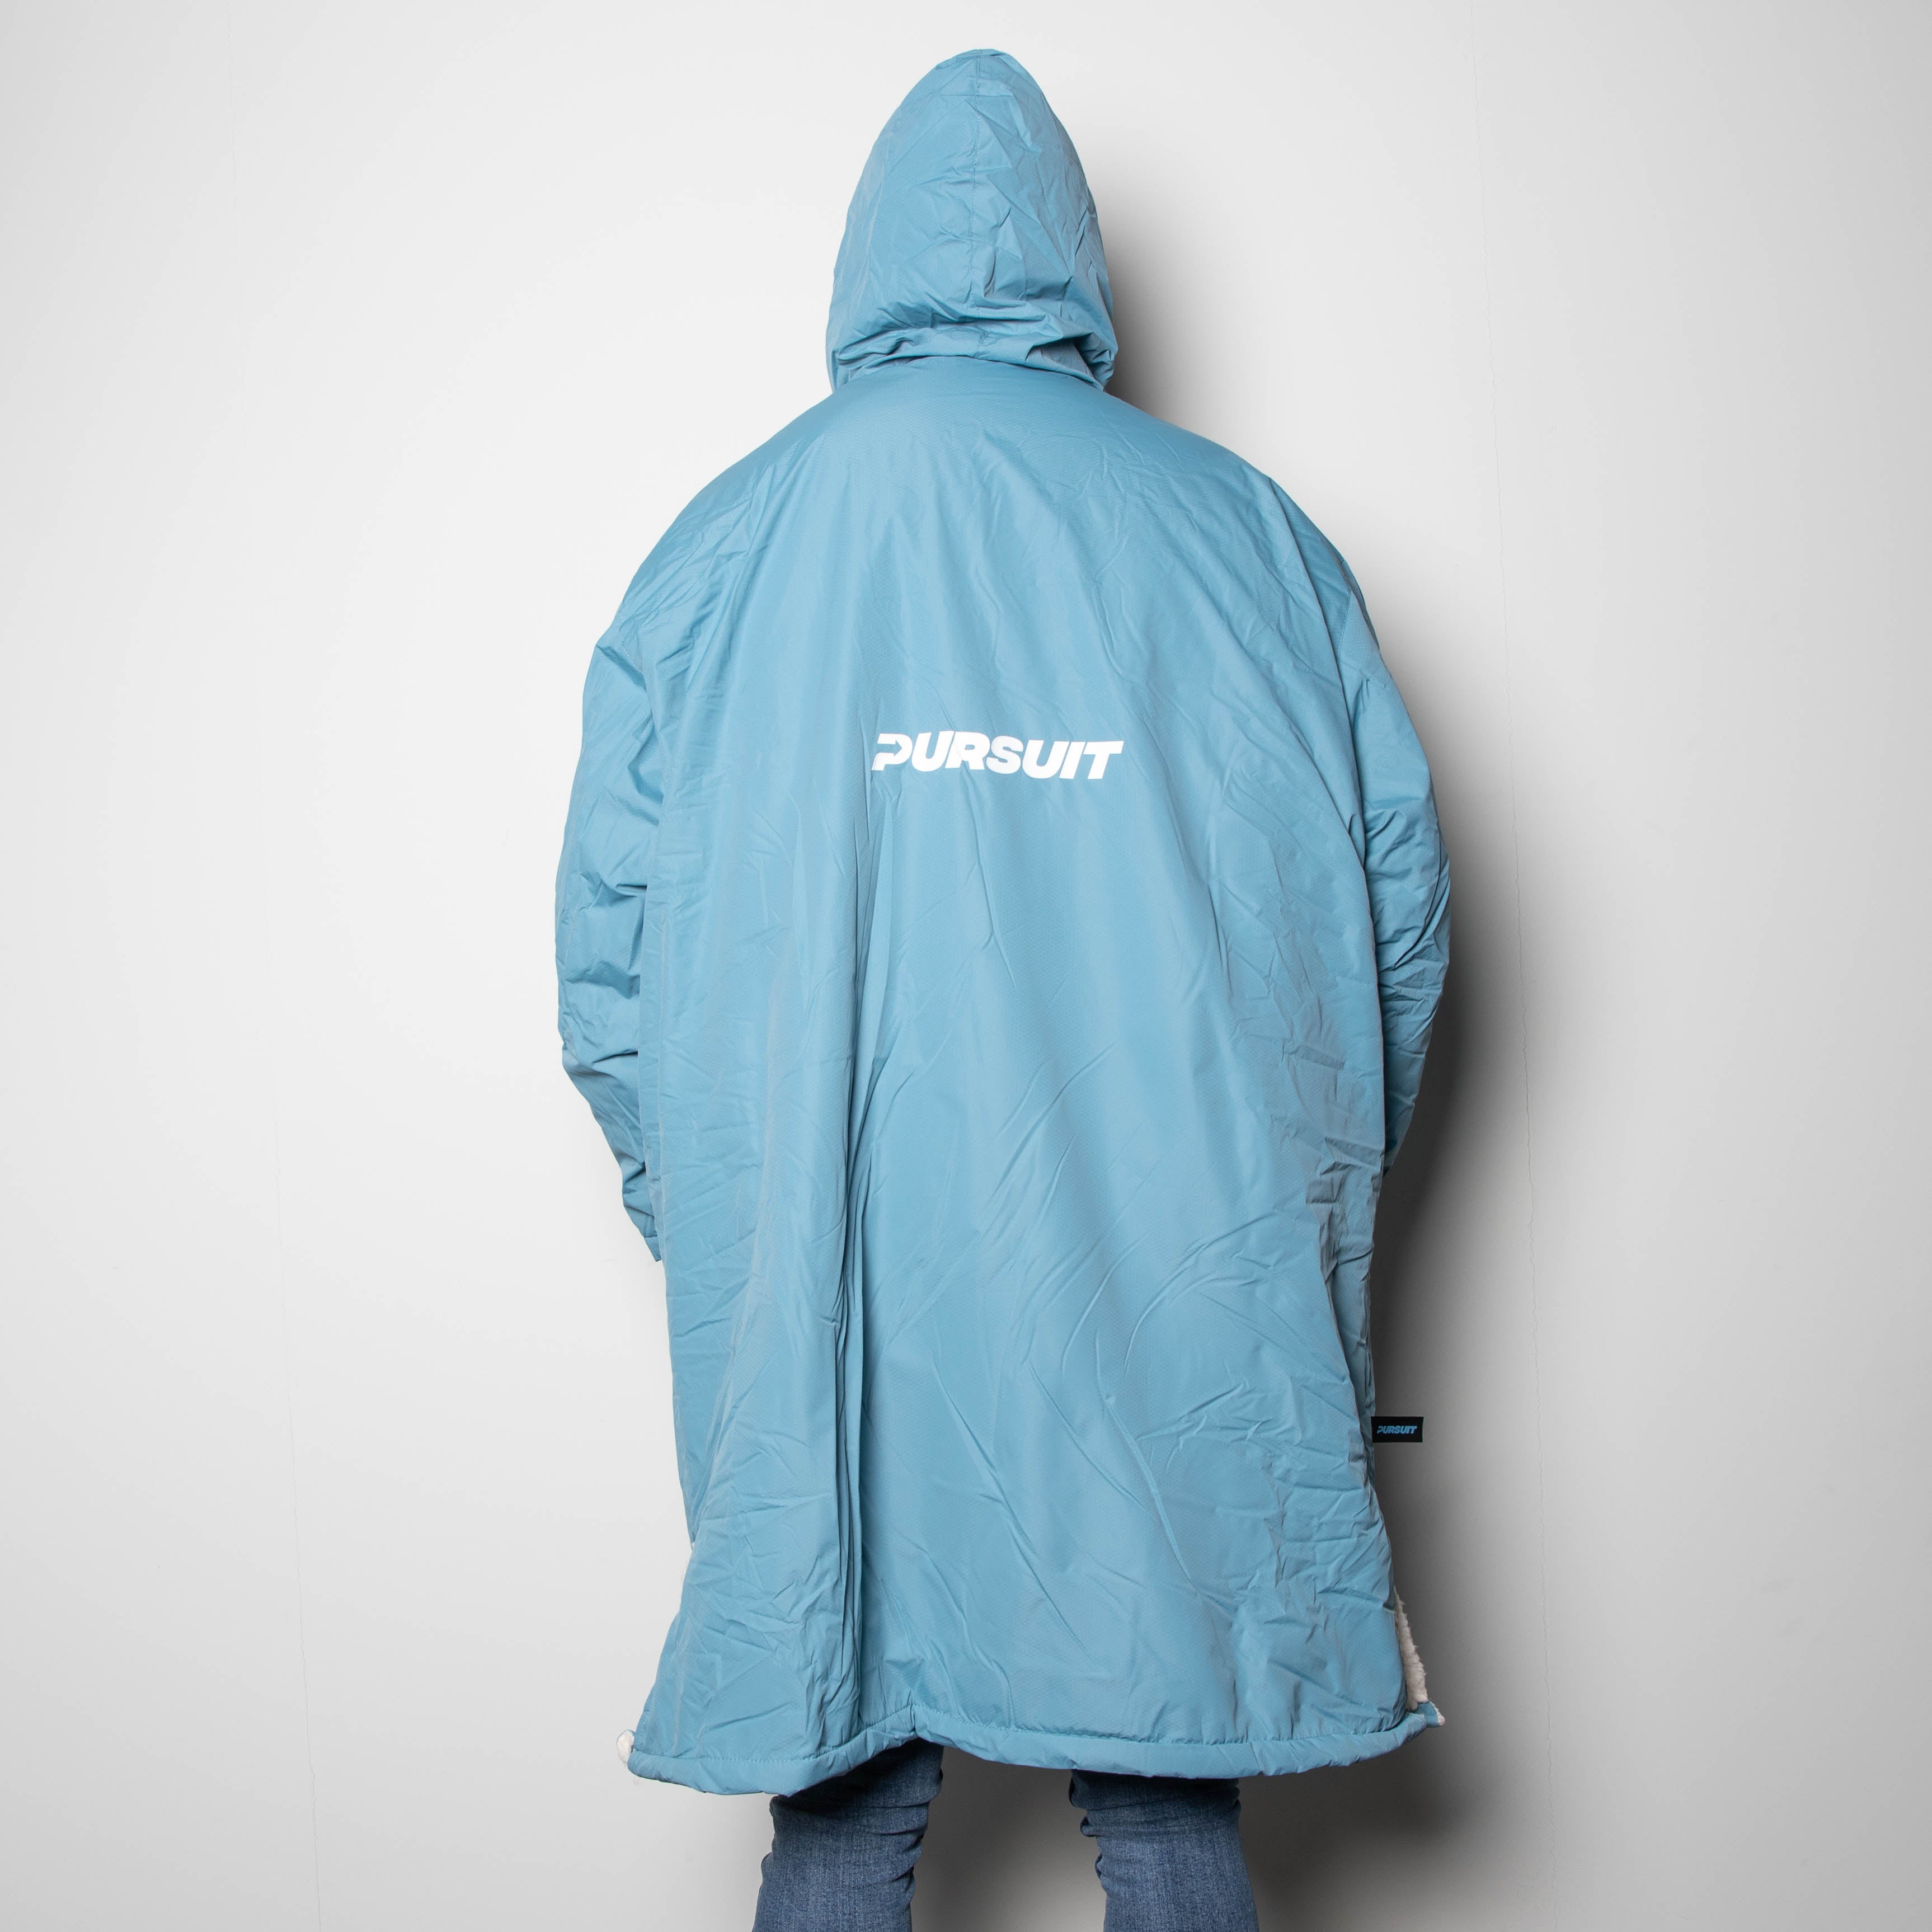 Oversized Adult Waterproof Active Dry Robe with Fleece Lining and Travel Bag in Light Blue